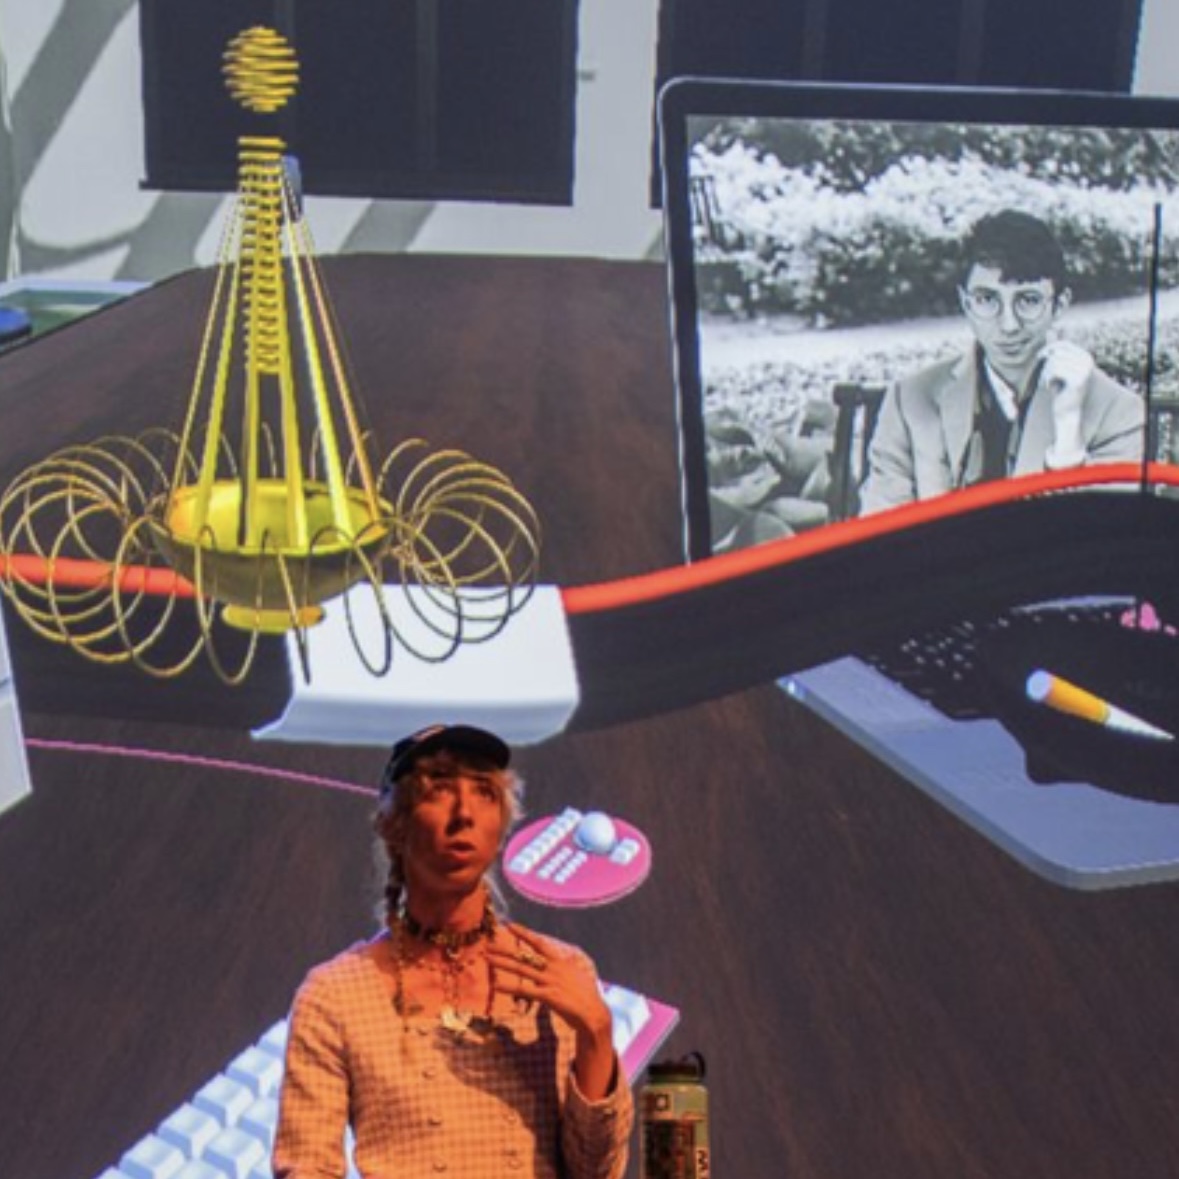 A trans woman (me) with long thin braids in a lavender tweed skirt suit standing behind a lectern with a projection of a virtual world behind her. On the left of the projection is a gold chandelier looking shape (my avatar) and on the right is a laptop with a portrait of a dour young man (my dead husband) on the screen.